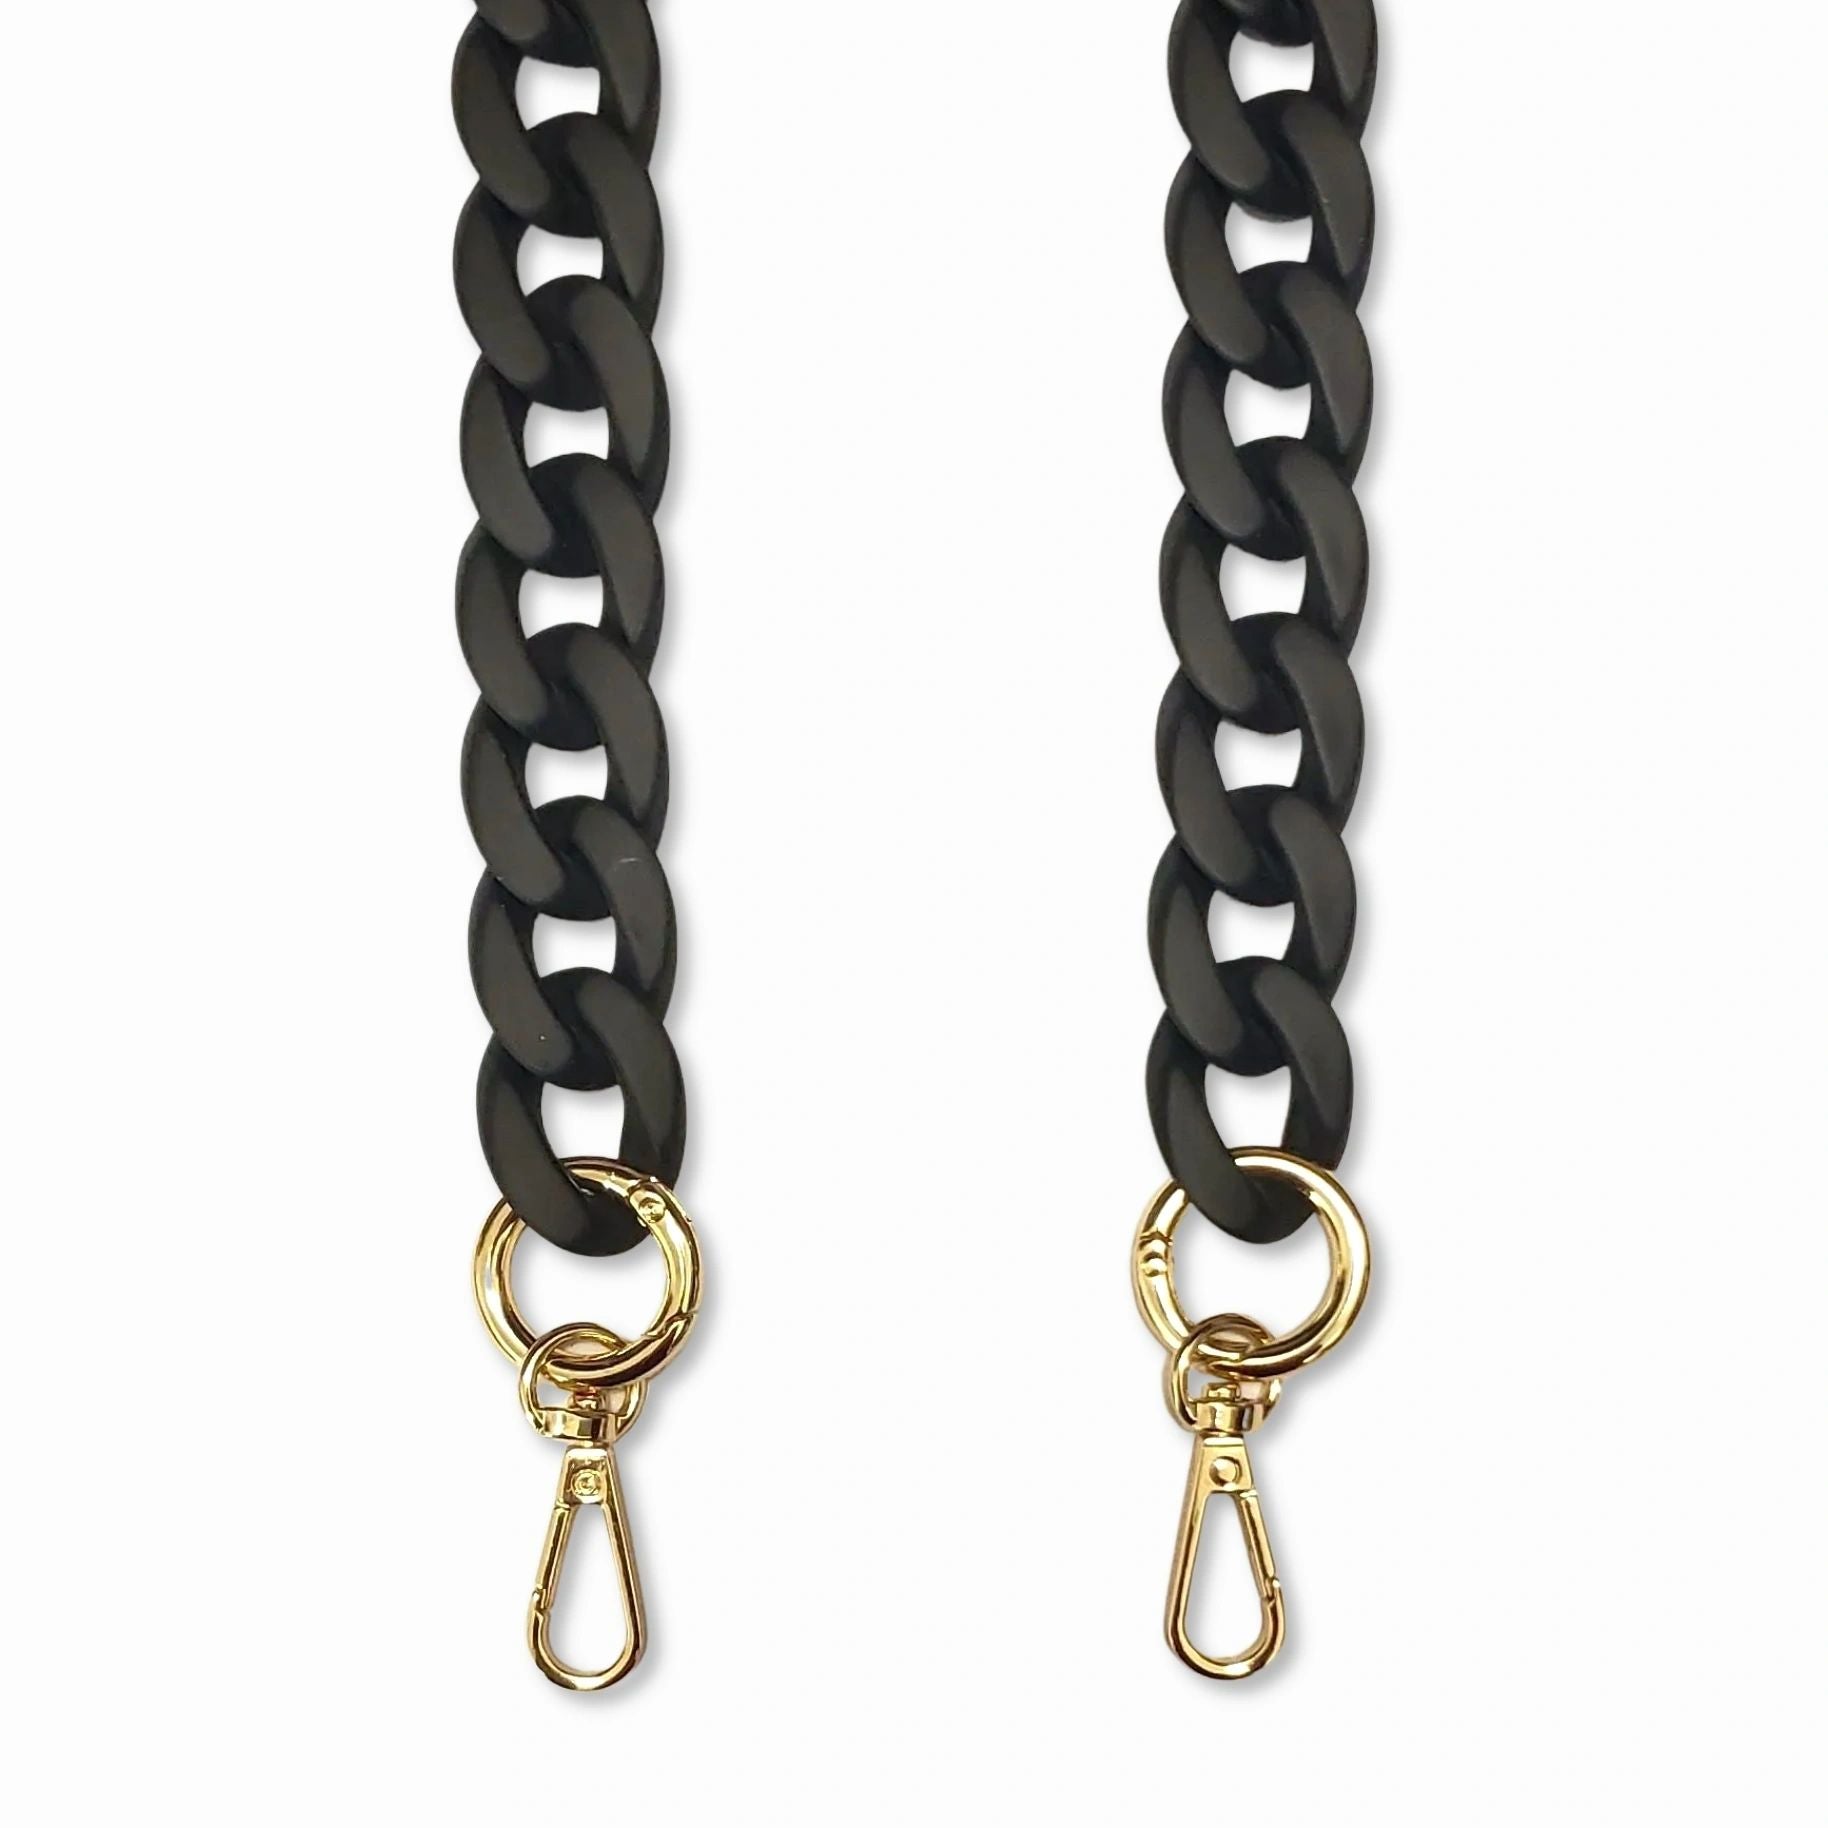 Crossbody black color Matte Resin Phone Chain with Golden Carabiners